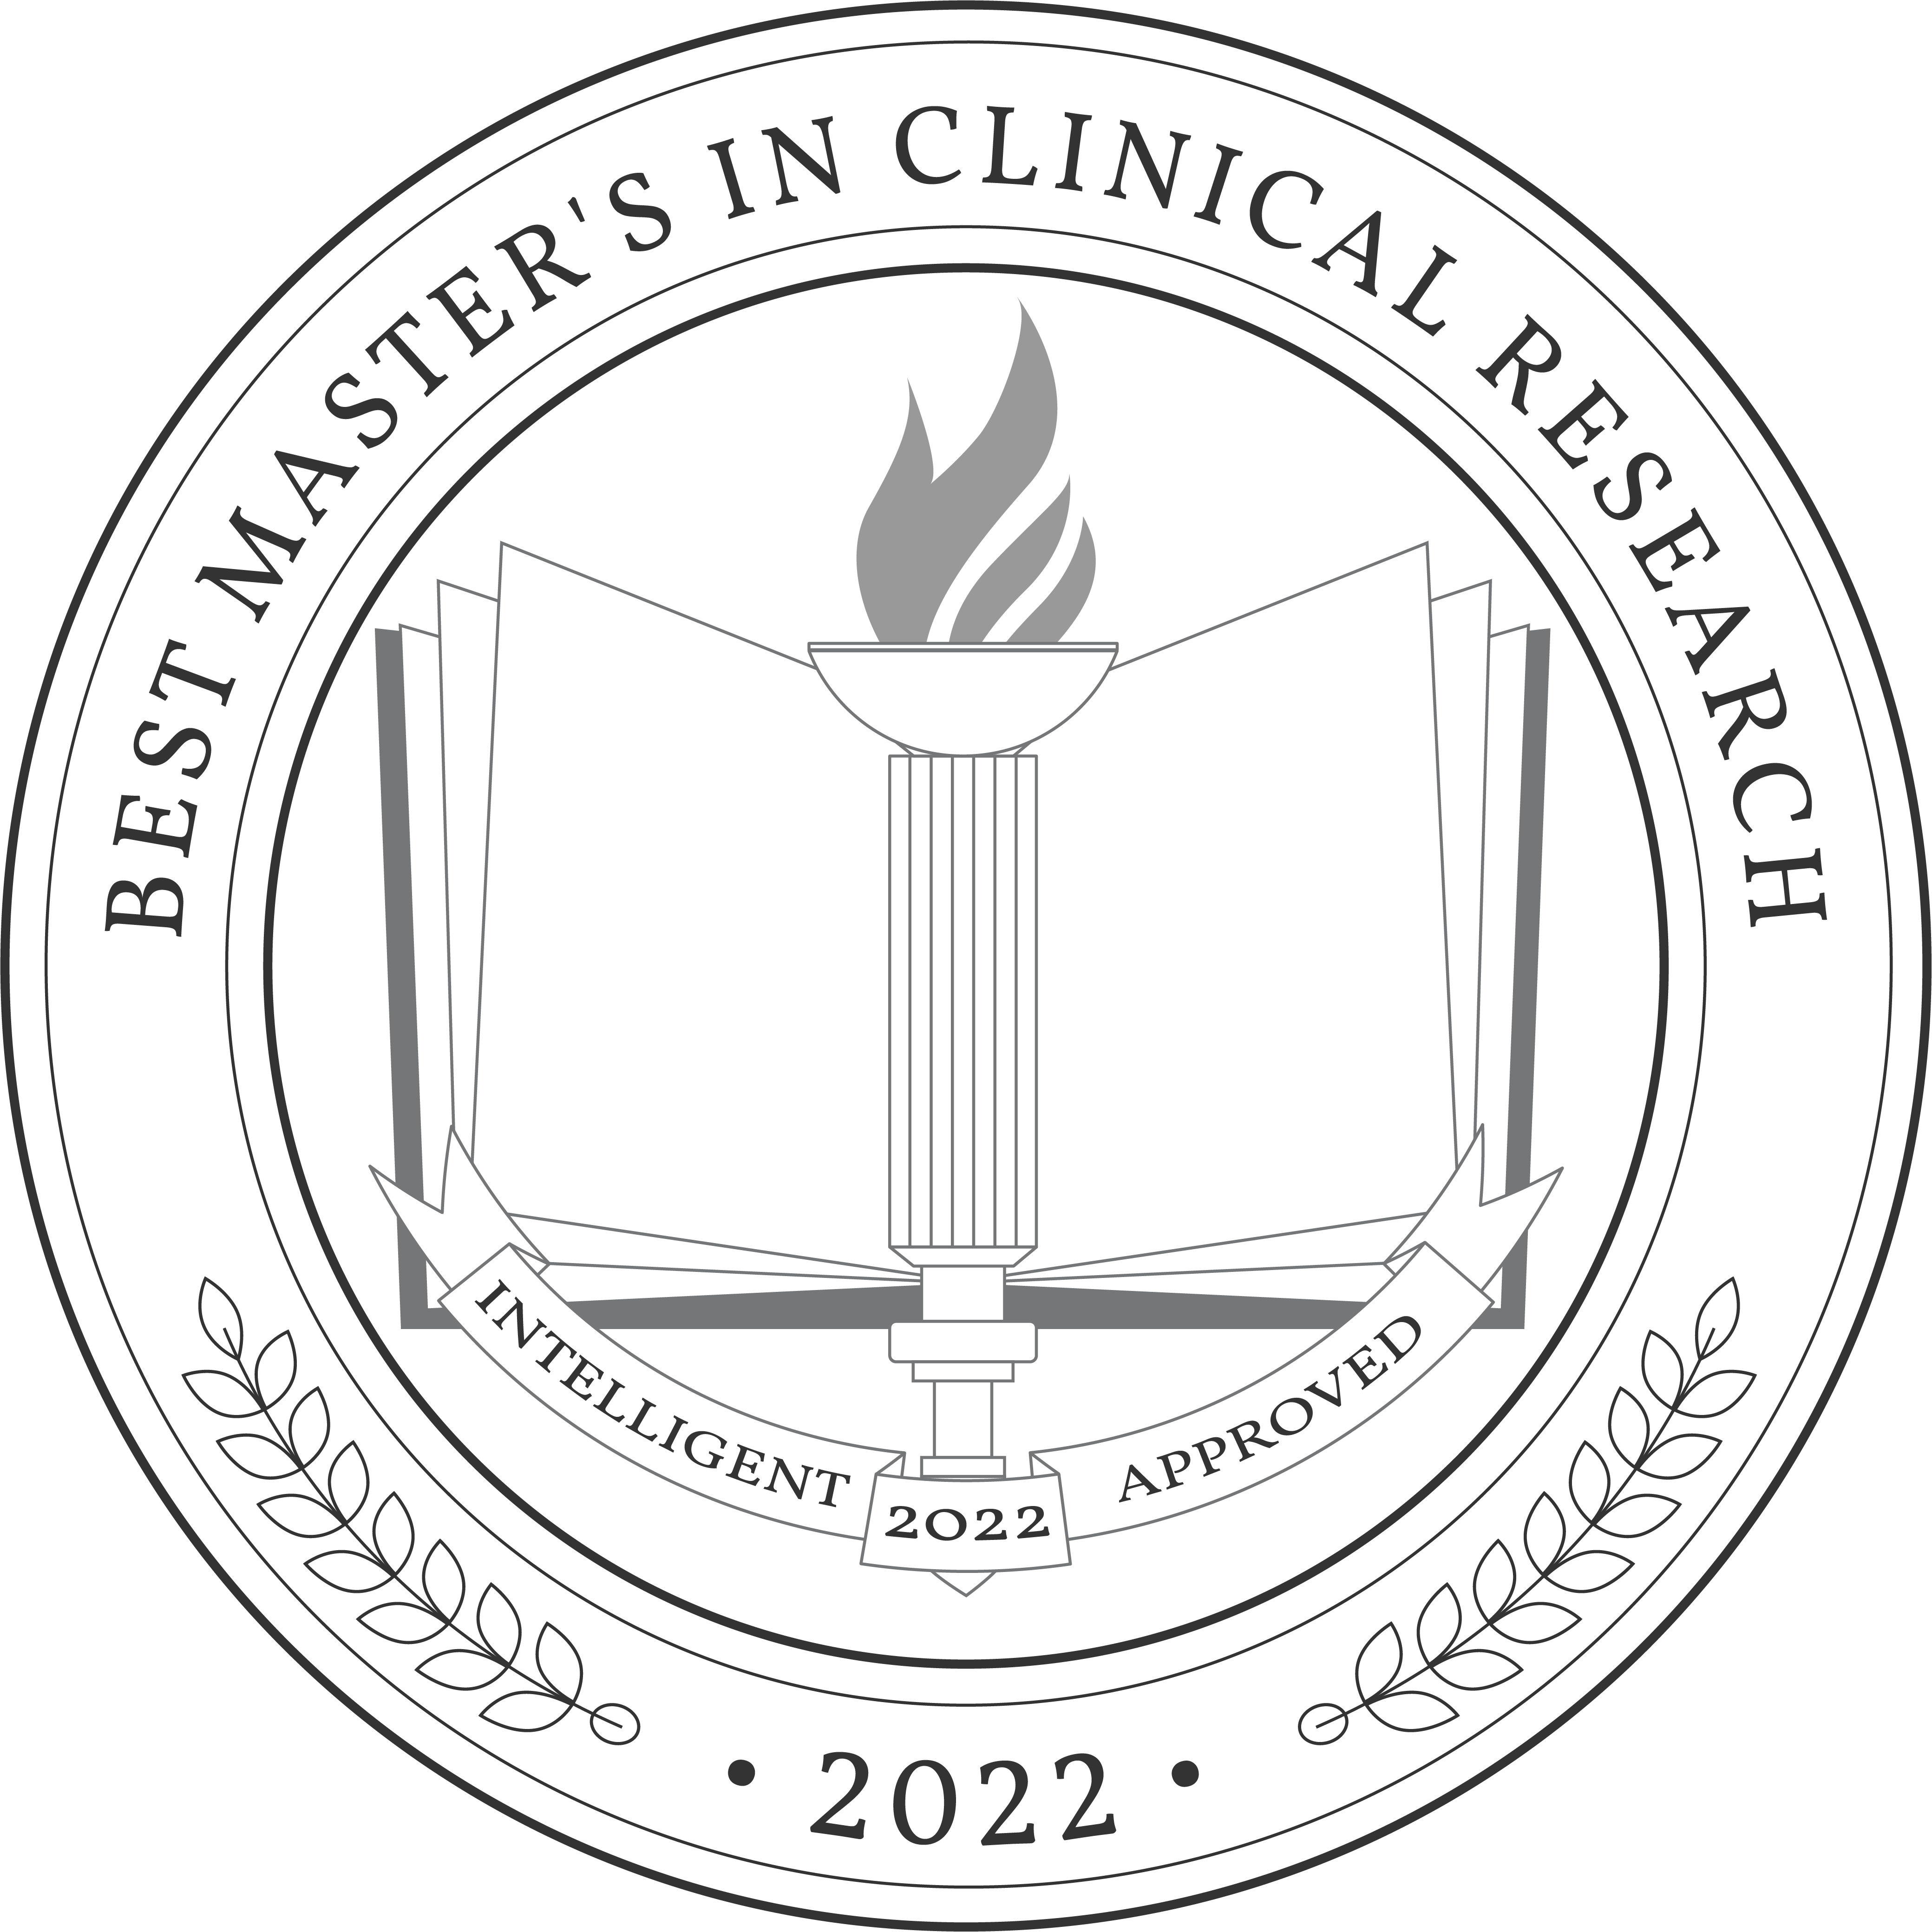 Best-Masters-in-Clinical-Research-Badge.png